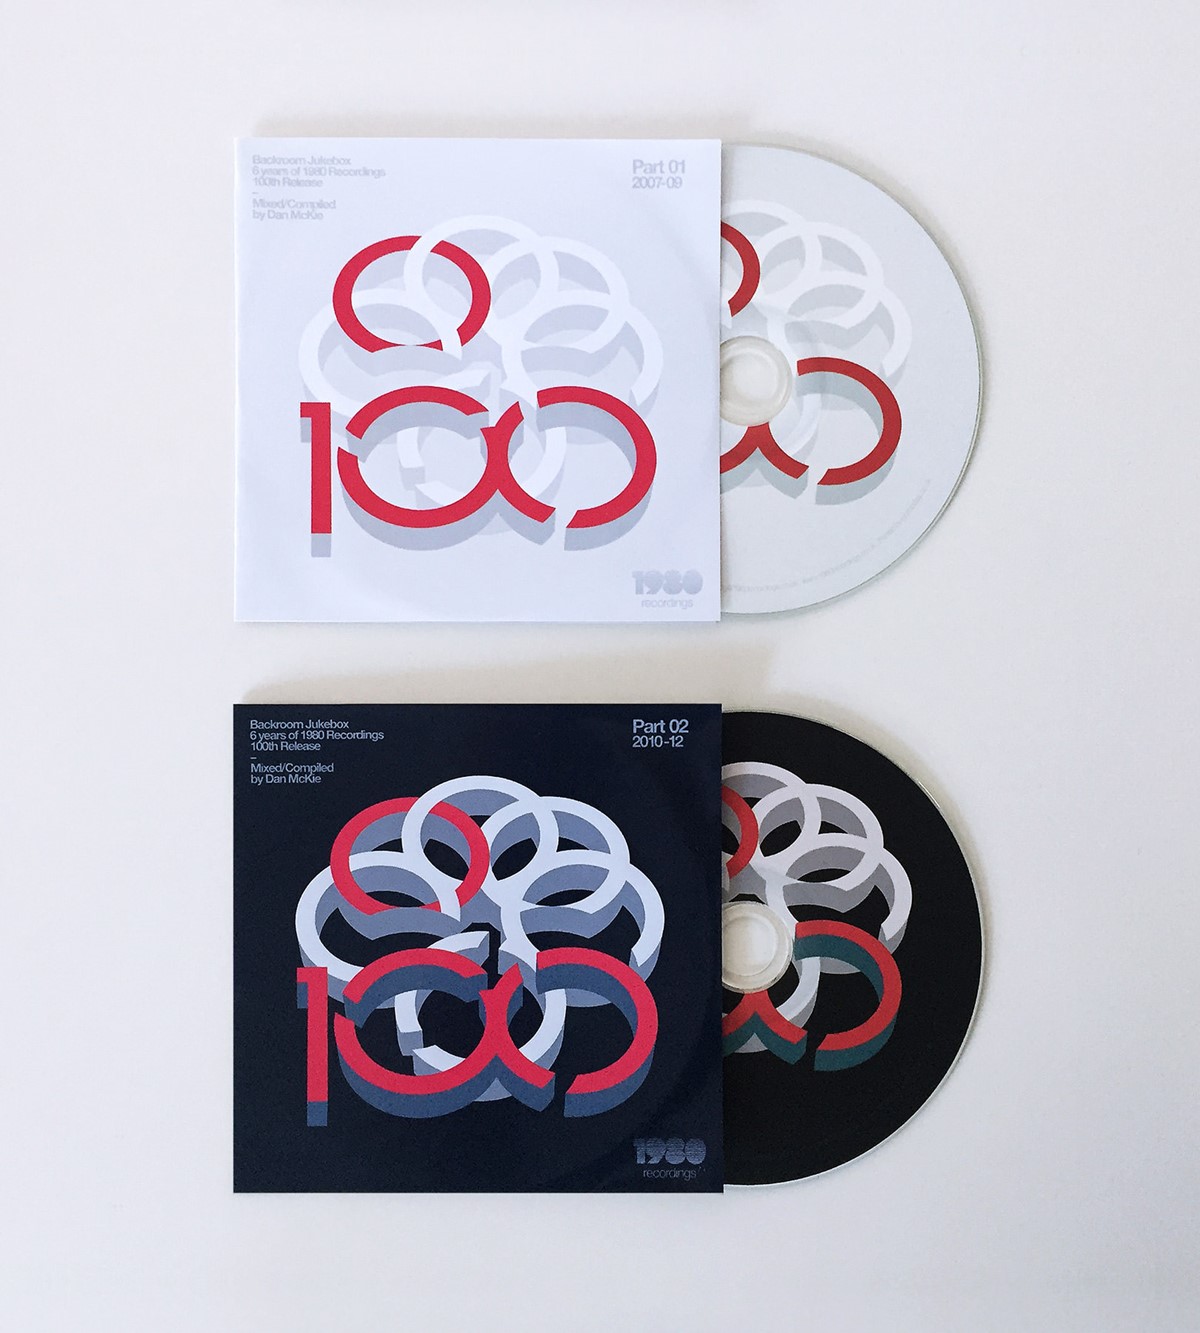 1980 Recordings. 100 releases album artwork. Brand identity design by Superfried.